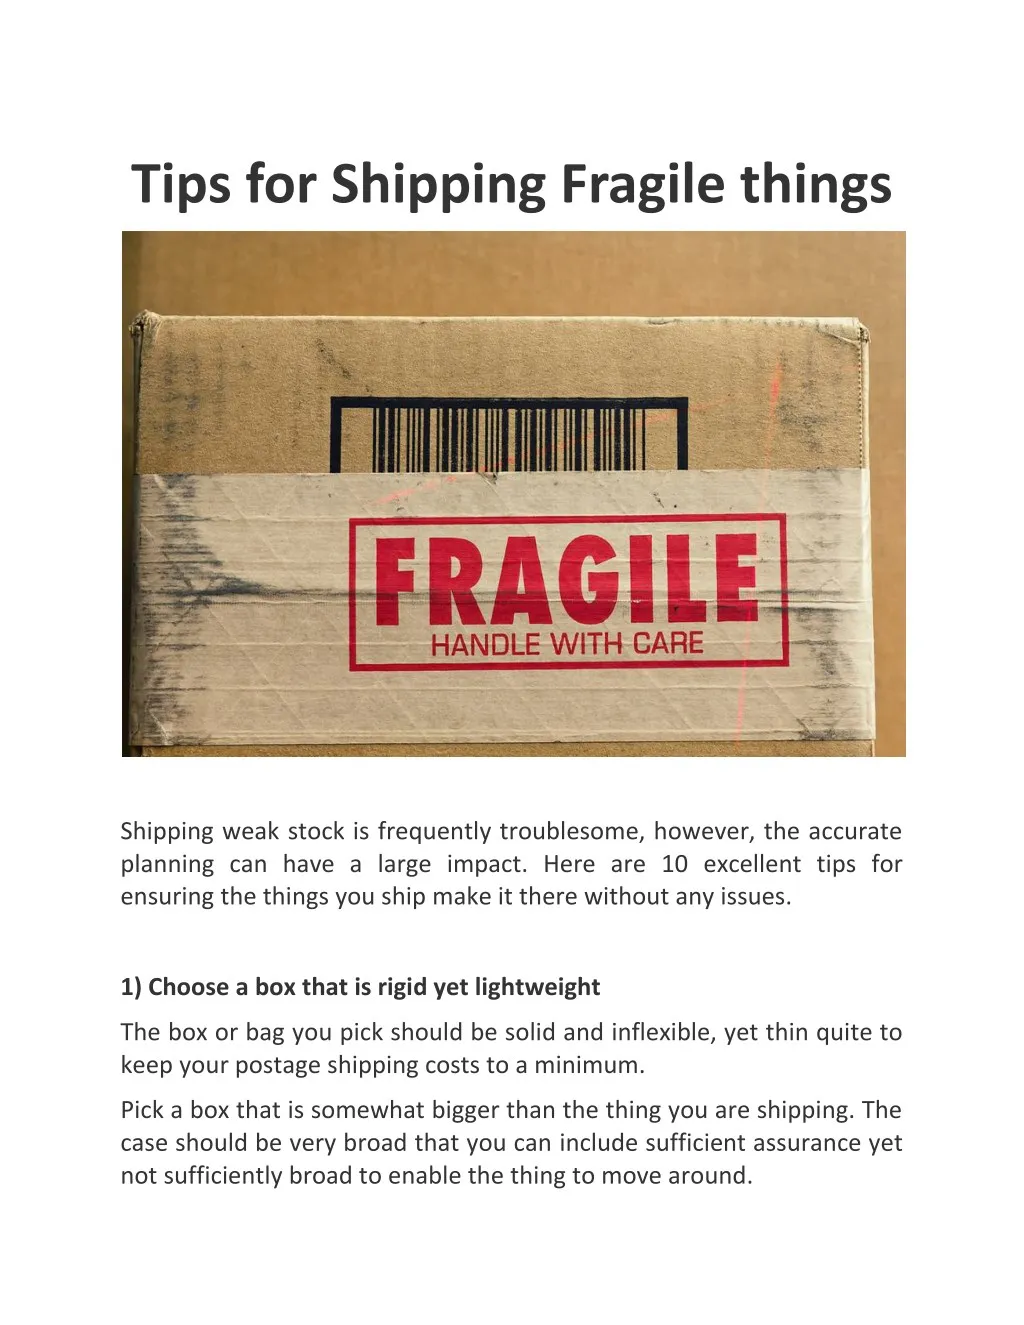 tips for shipping fragile things